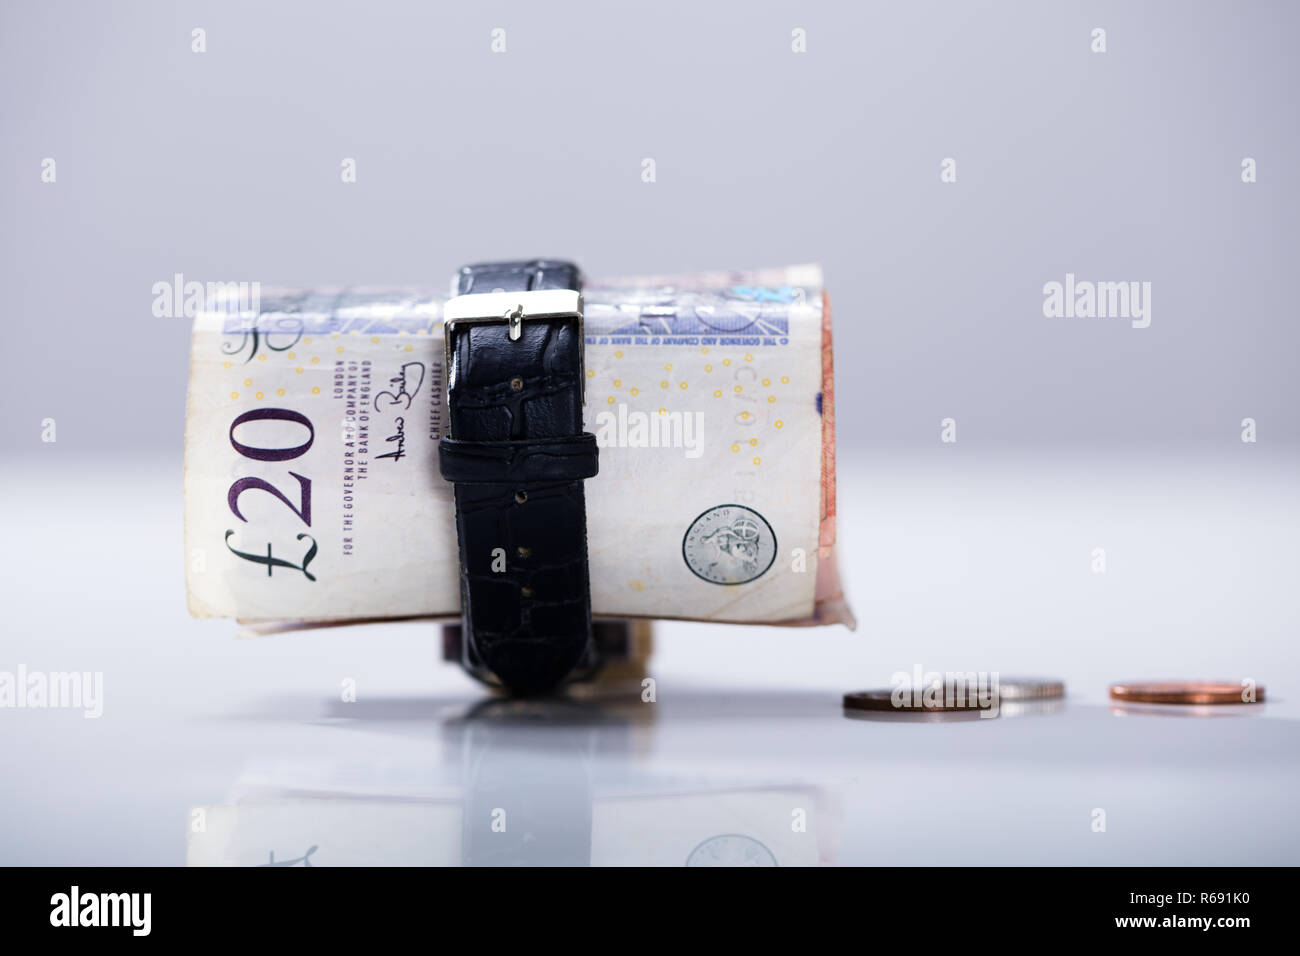 Rolled Up Twenty Pounds Currency Note Inside The Wrist Watch Stock Photo